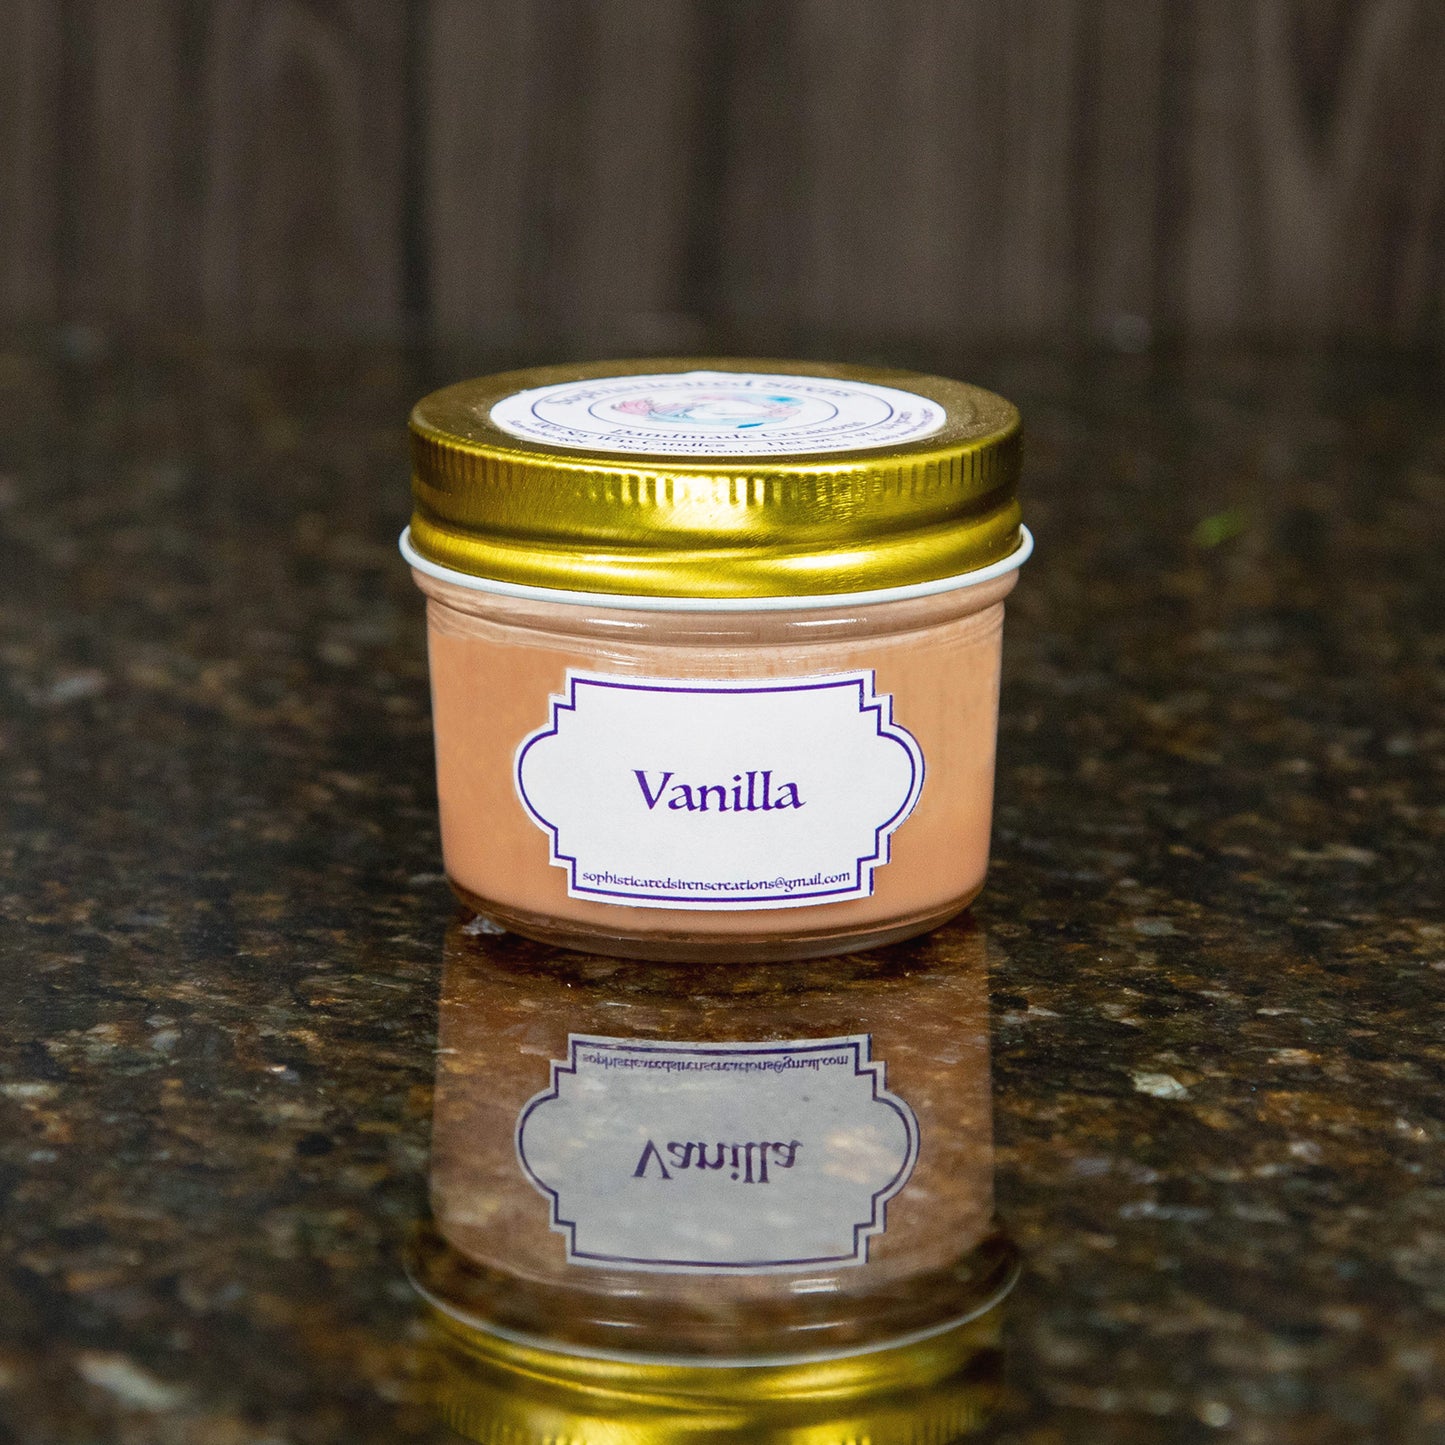 a tan candle with a gold lid and a label that reads "vanilla"